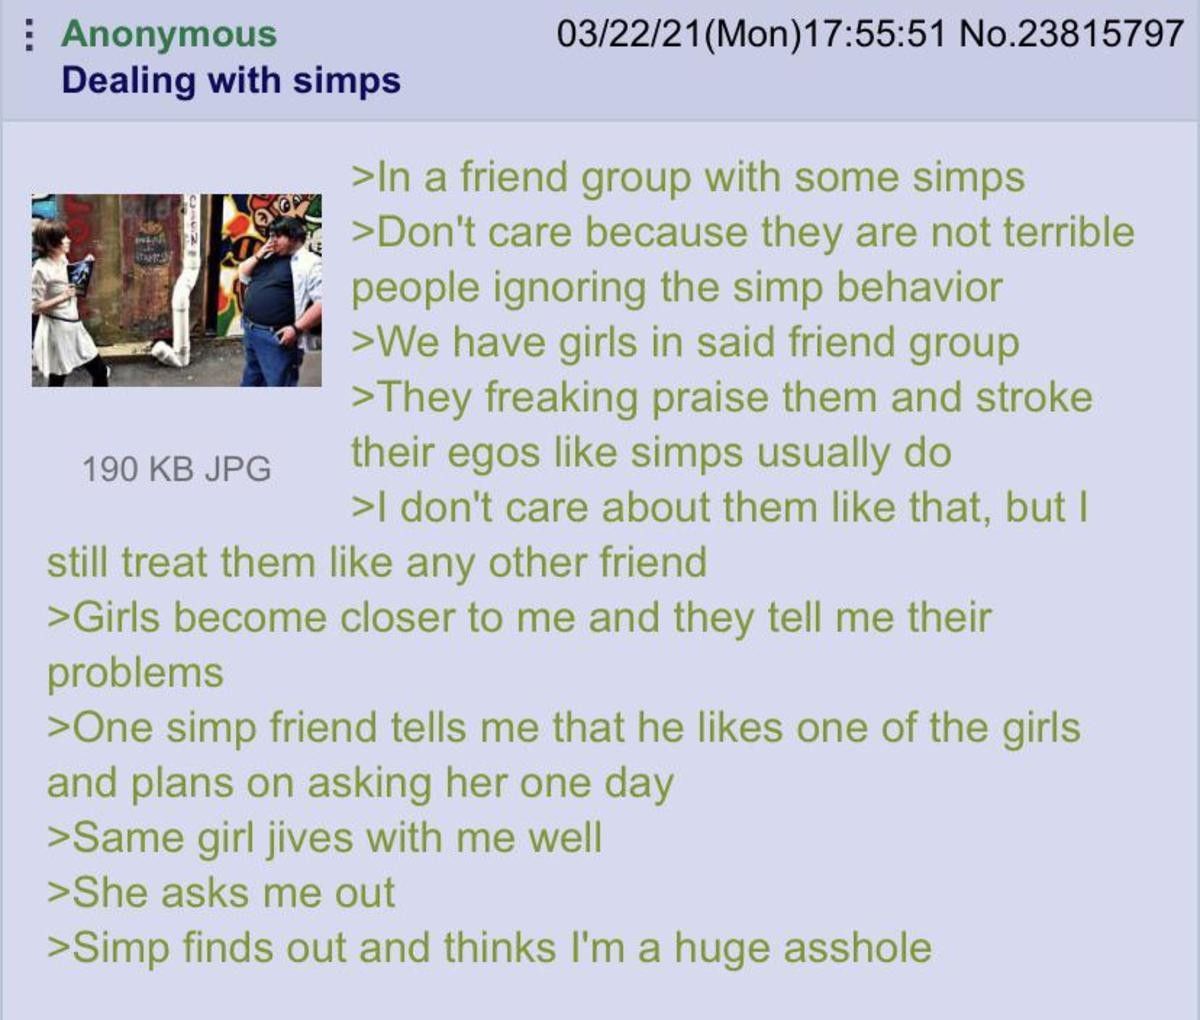 Simp thinks Anon is an ***